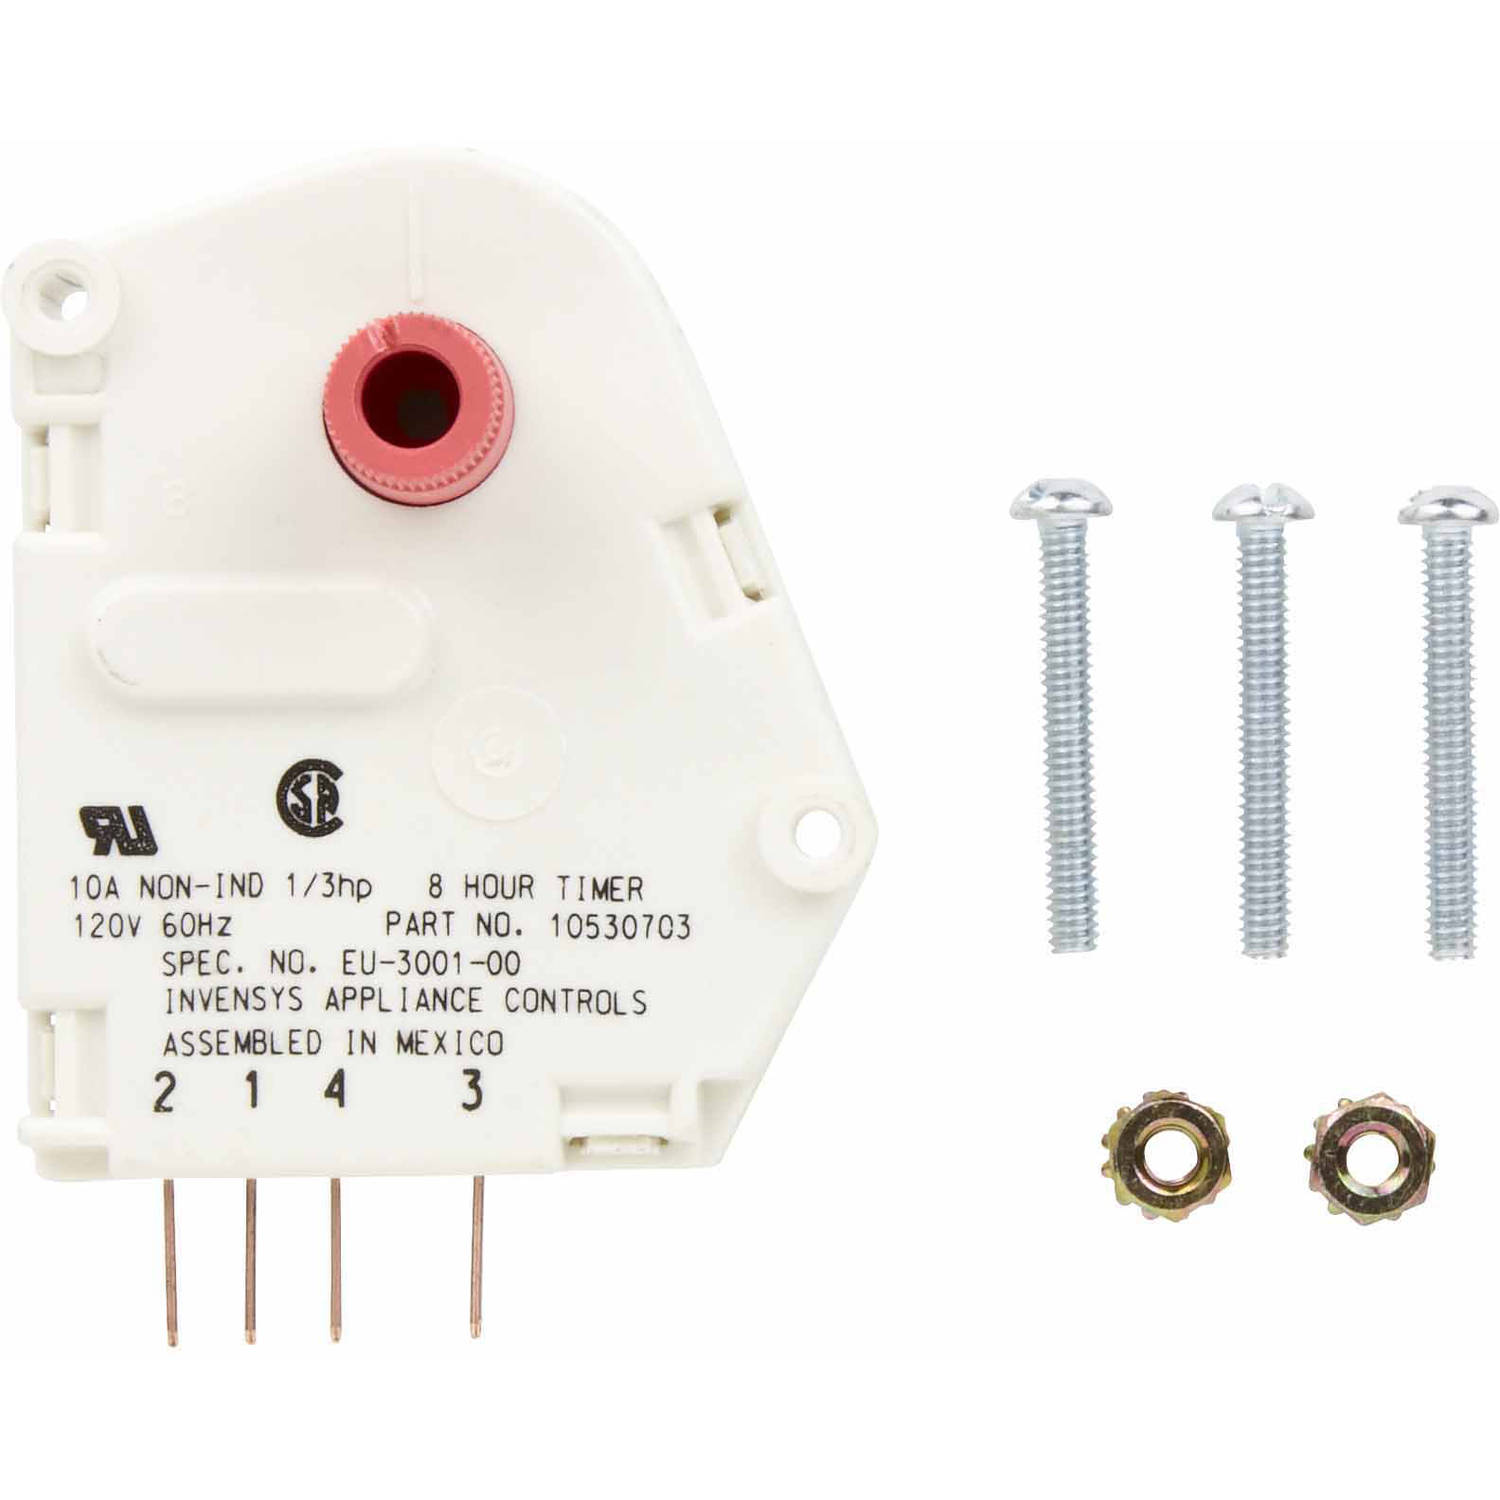 Whirlpool R0131577 Defrost Timer - image 1 of 4